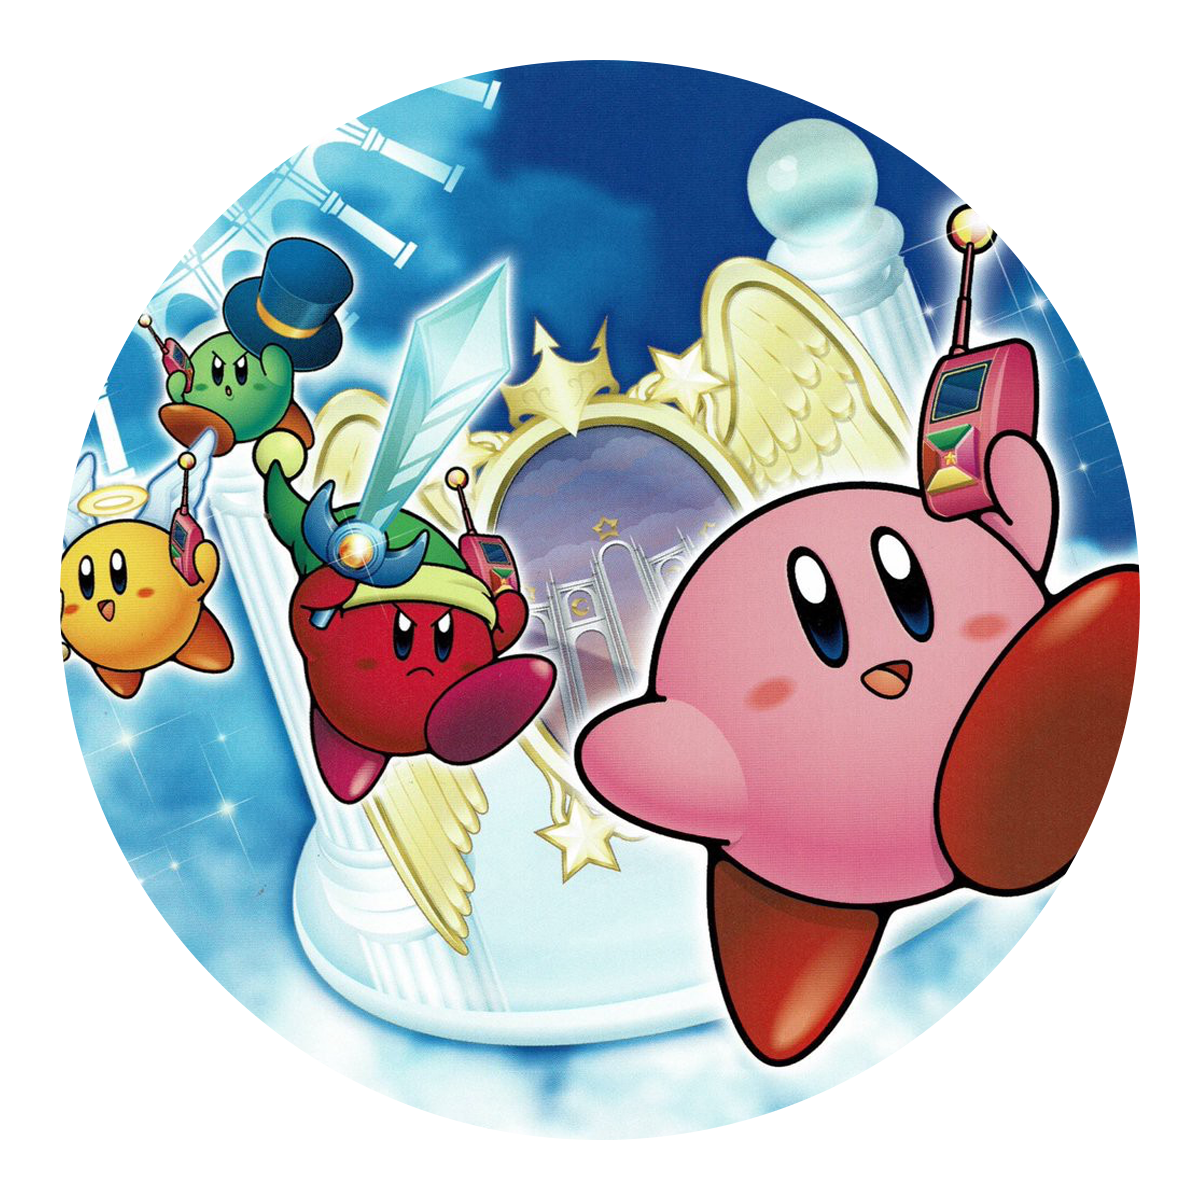 Kirby & The Amazing Mirror Needs to Come to the Nintendo Switch | by Minyu  | SUPERJUMP | Medium